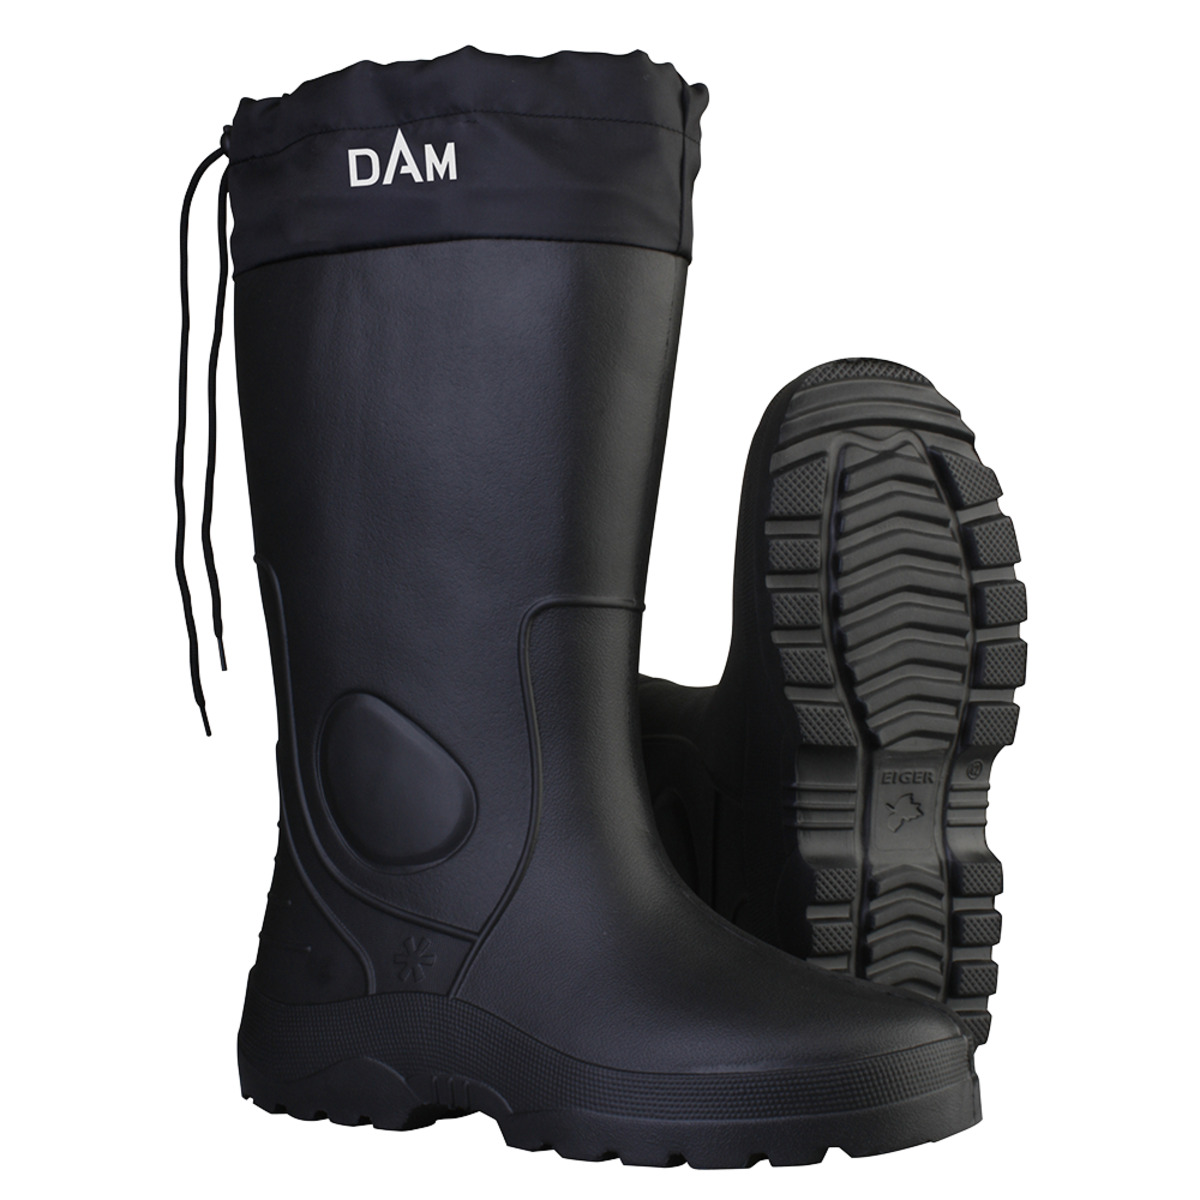 Dam Lapland Thermo Boots - 44/9 BLACK